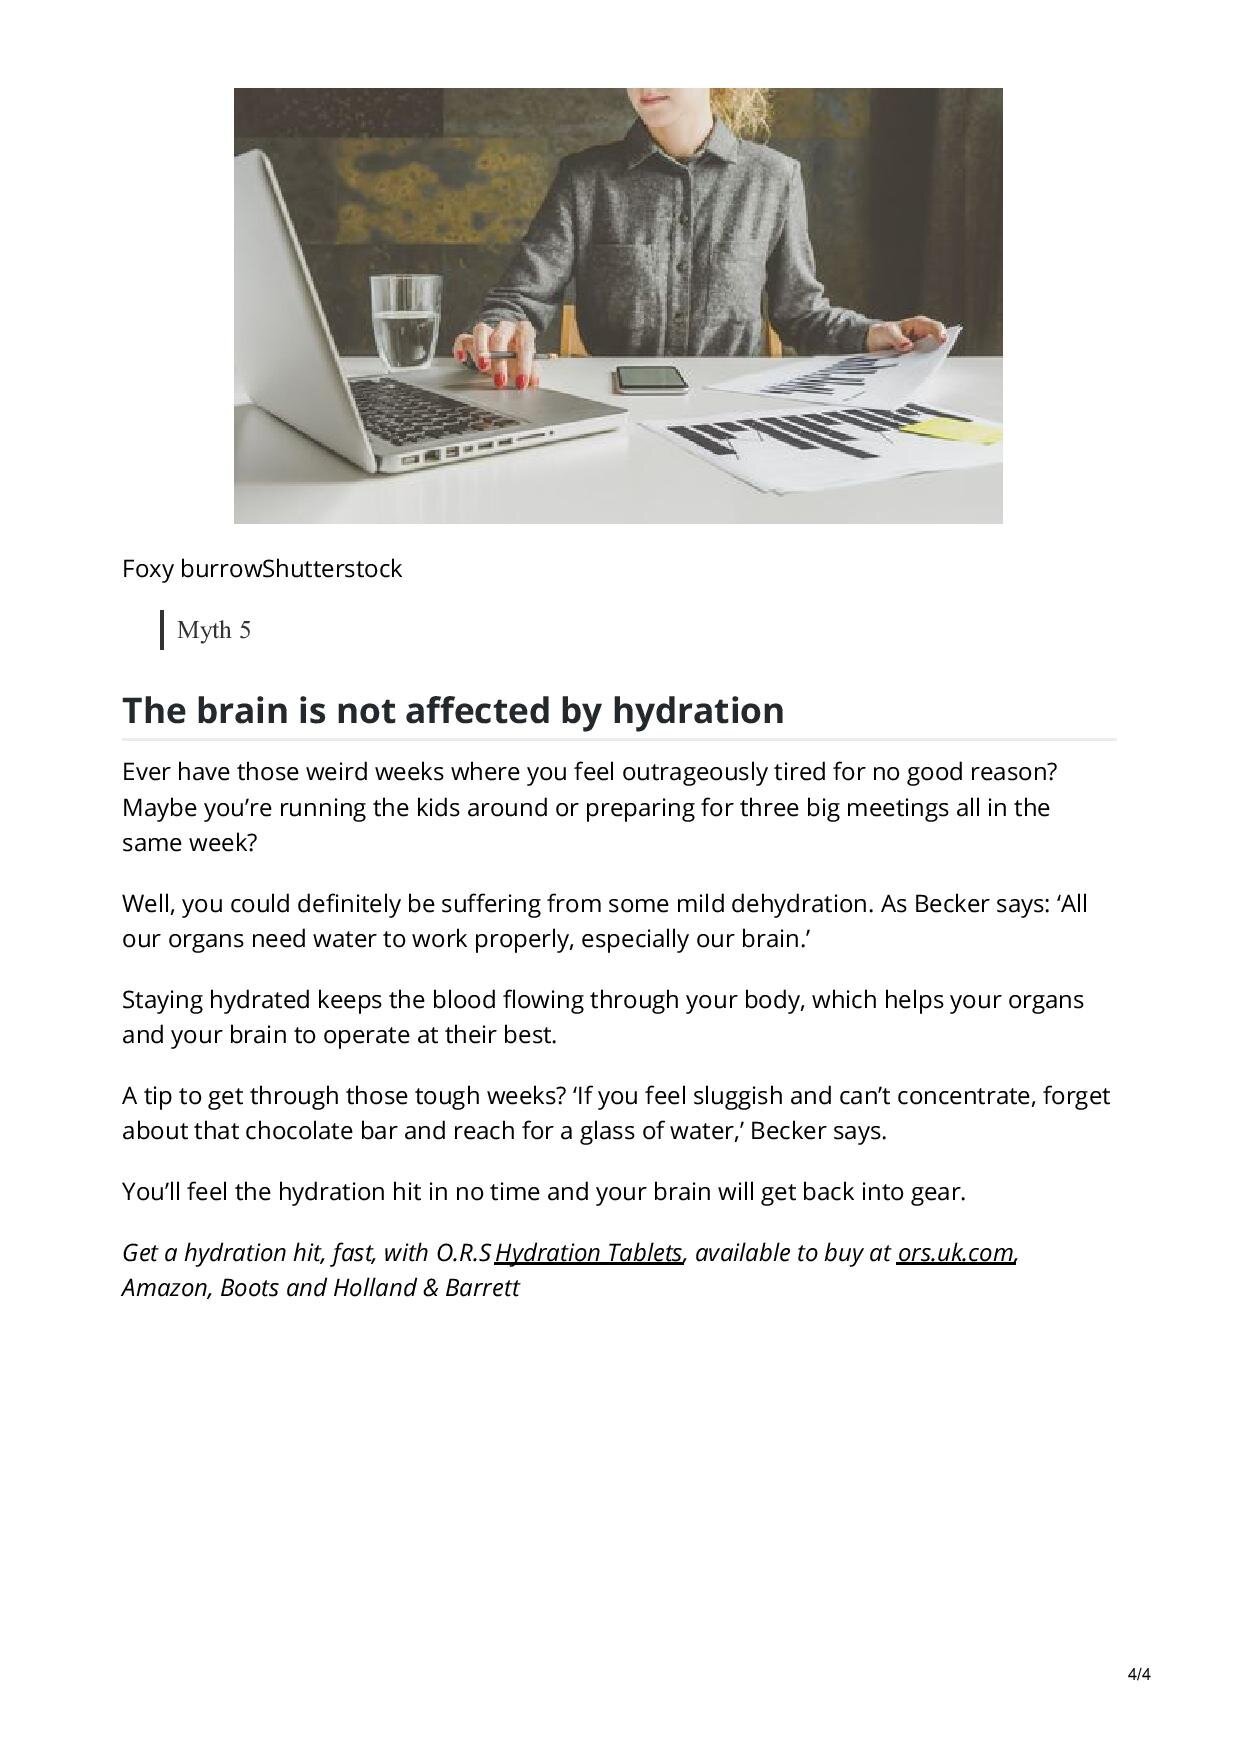 netdoctor.co.uk-5 hydration myths this nutritionist wants you to stop believing-page-004.jpg